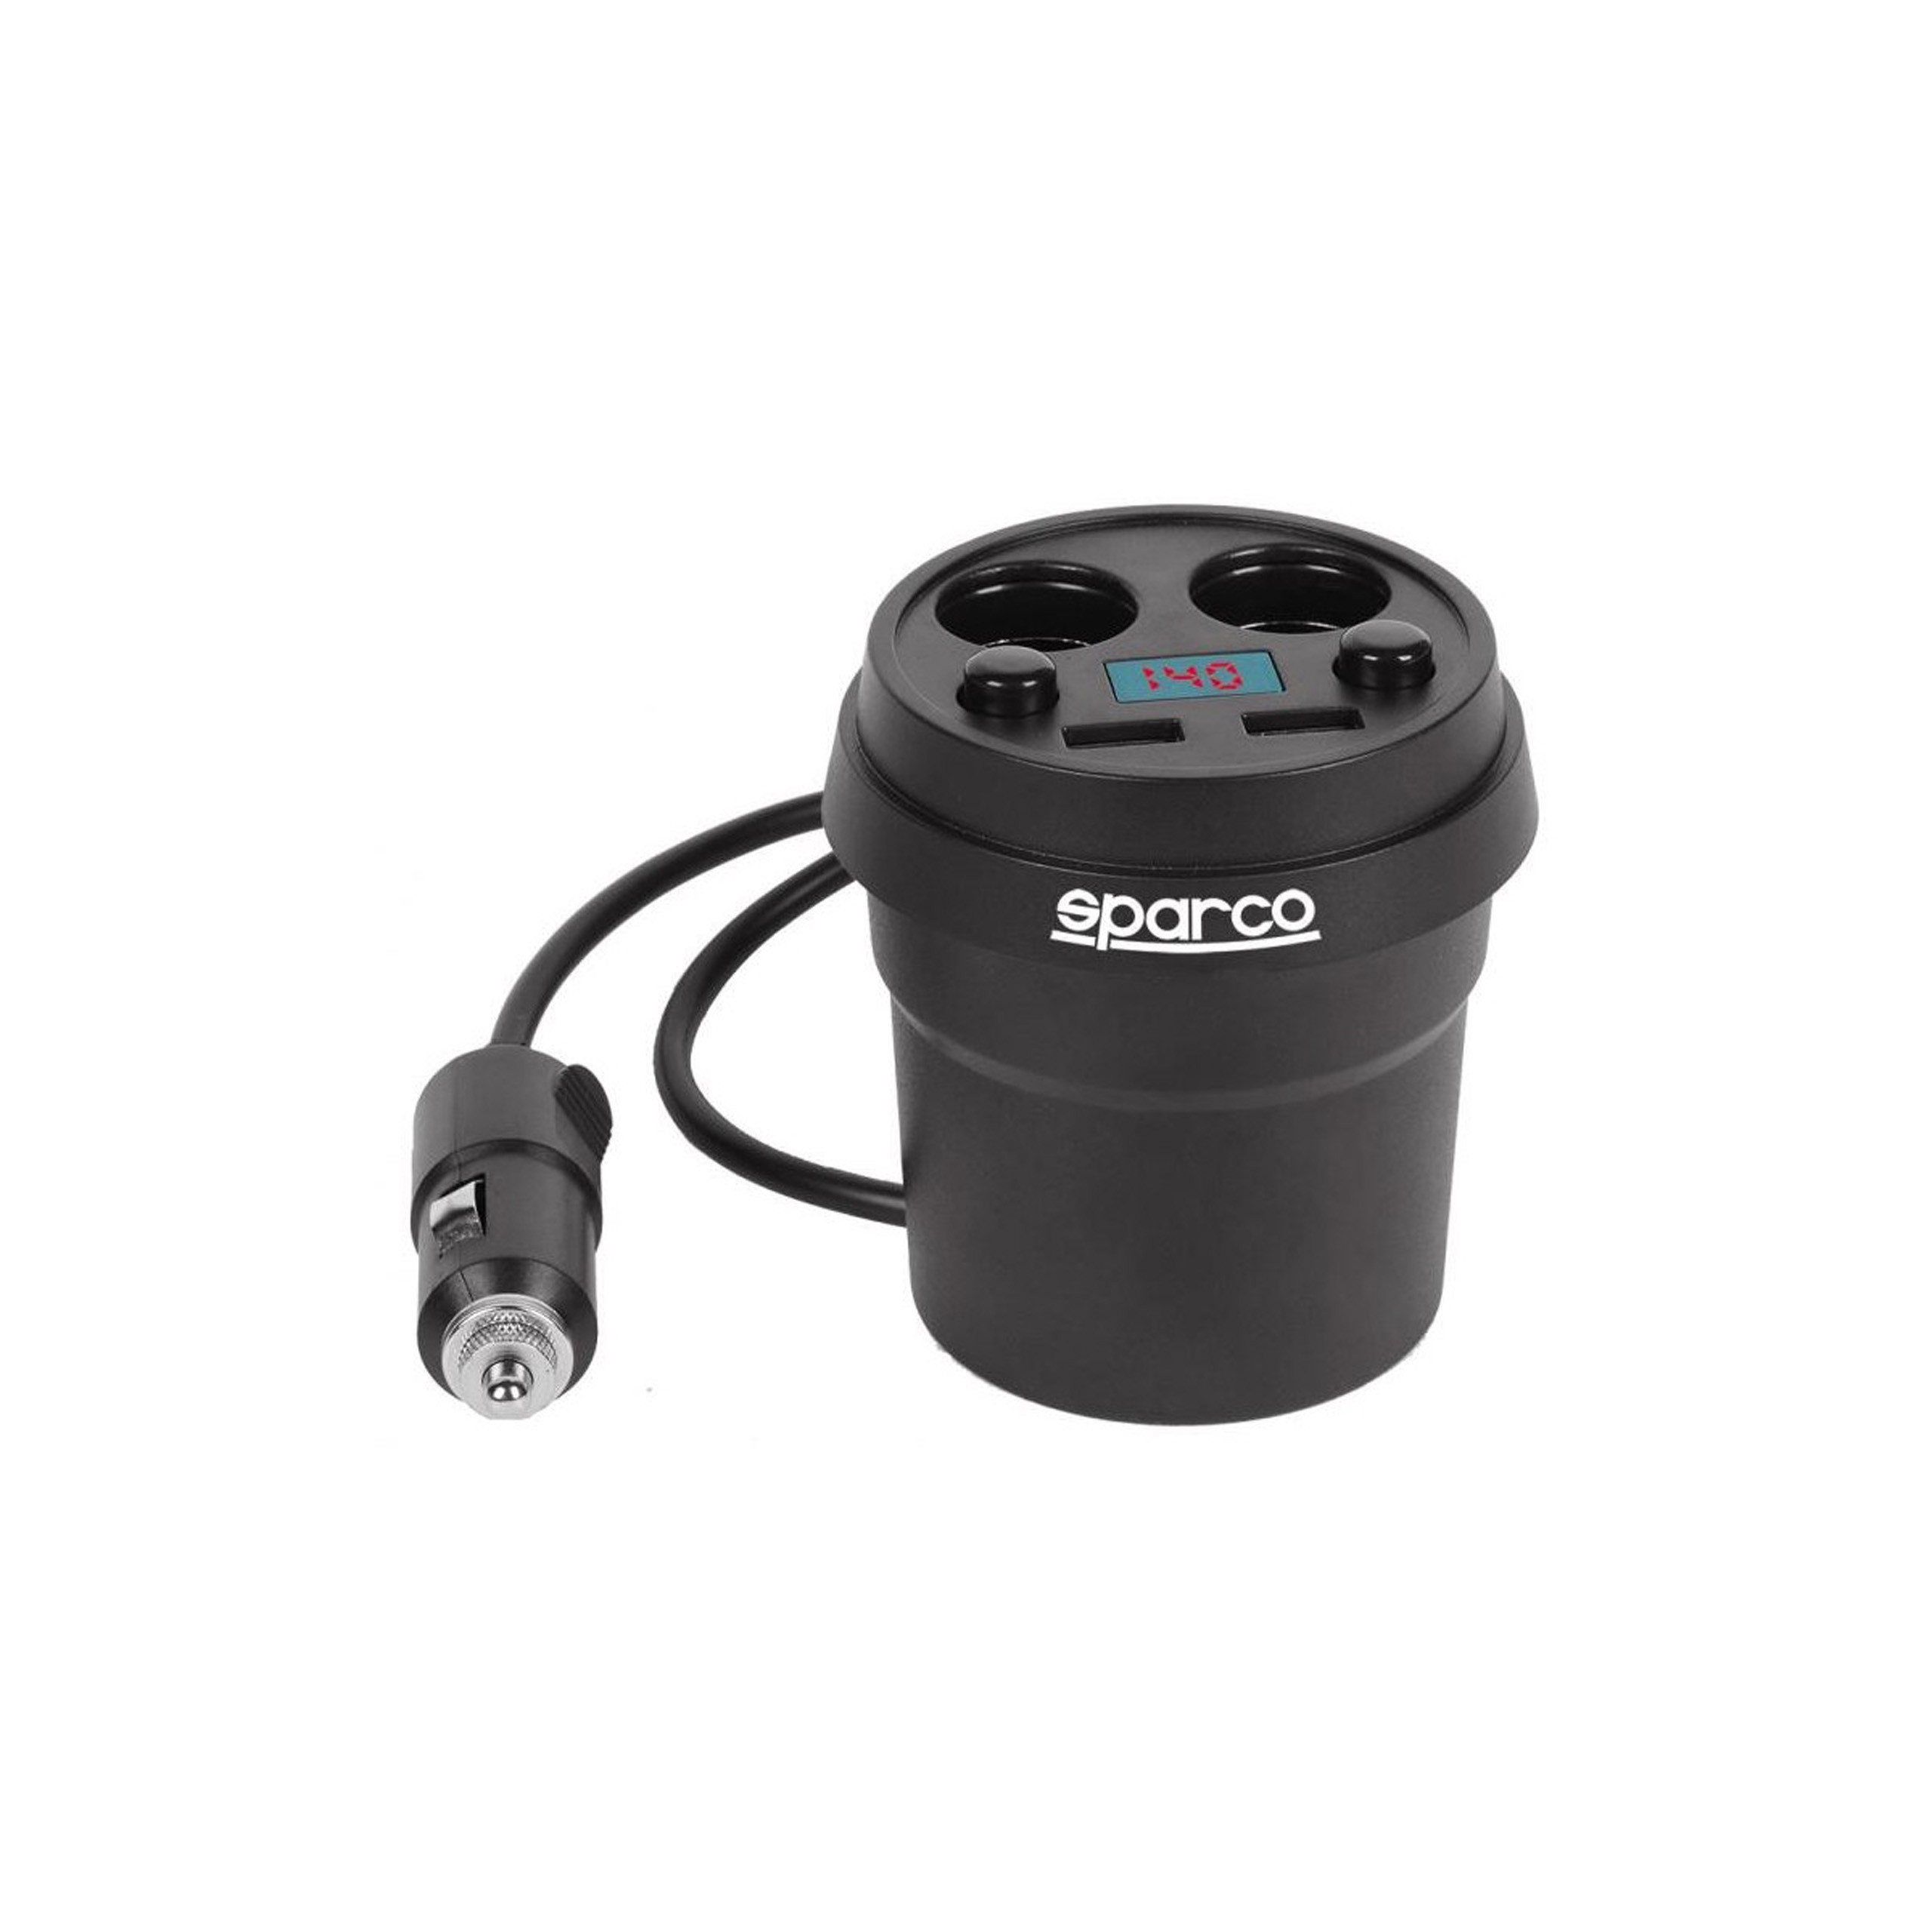 SPC5002 SPARCO CUP CHARGER 3.1A ABS BLACK